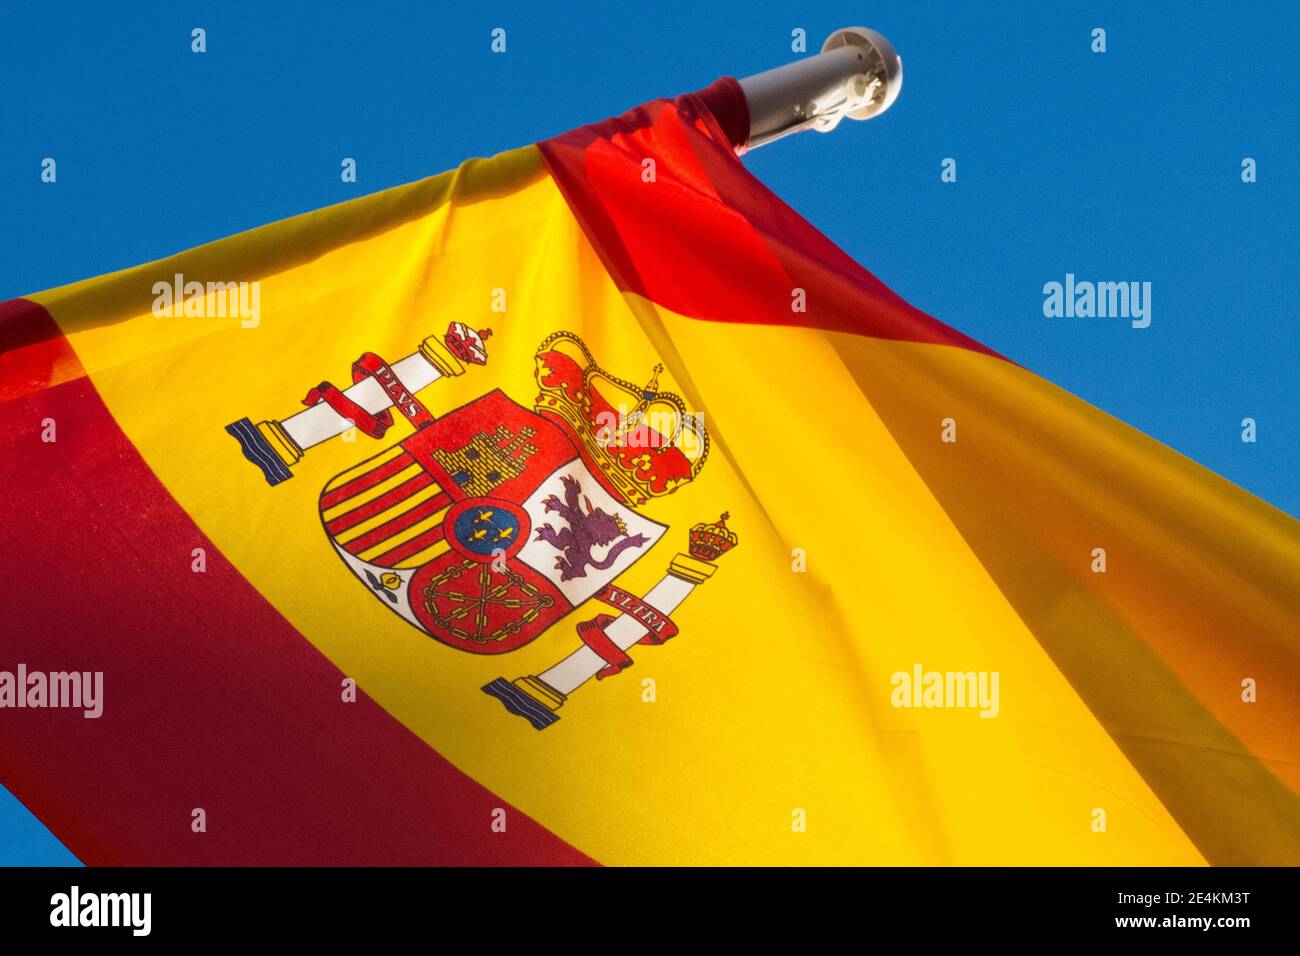 Spanish national flag flies from a flag pole above a cafe in a backstreet in Bournemouth, Dorset. 14 January 2014. Photo: Neil Turner Stock Photo